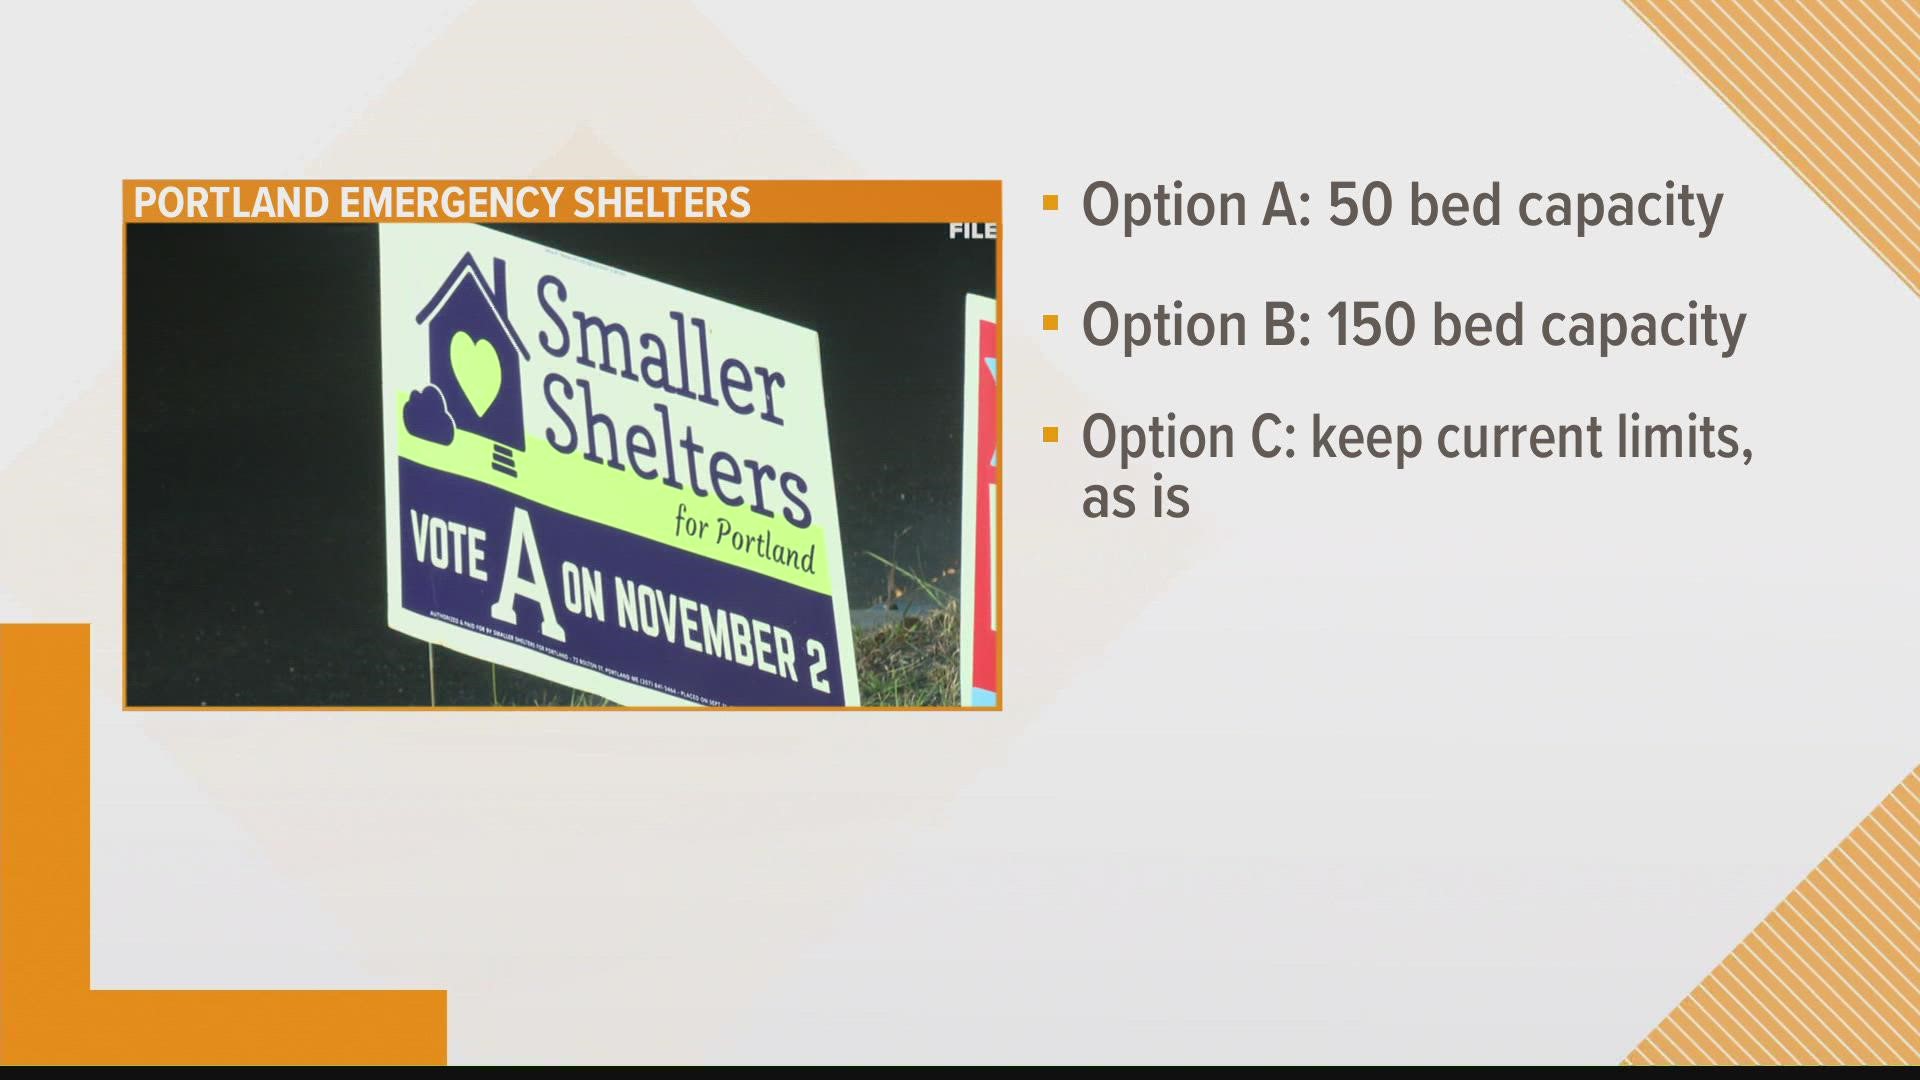 Smaller Shelters for Portland wants to cap new emergency homeless shelters in the city at 50 people. The Portland City Council is proposing a cap of 150.